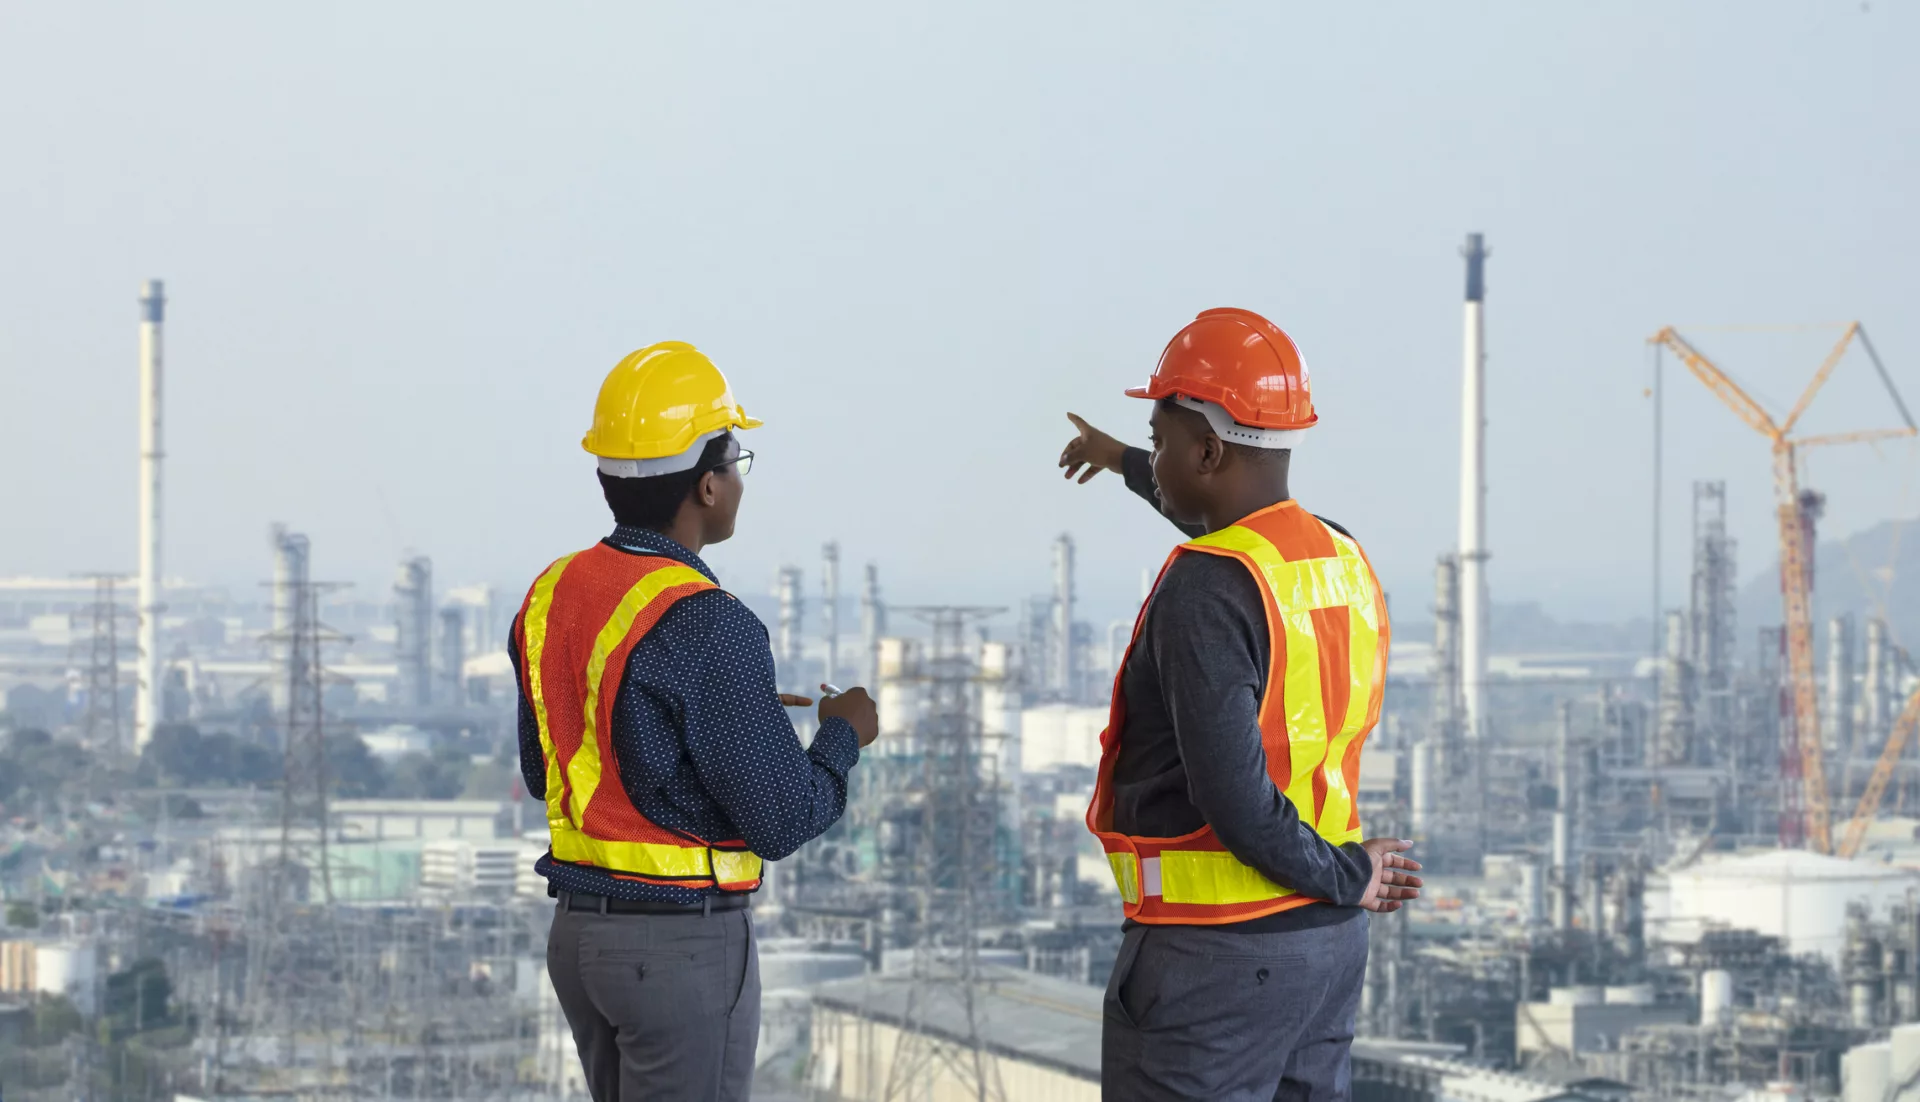 Workers discuss safety culture at an oil refinery